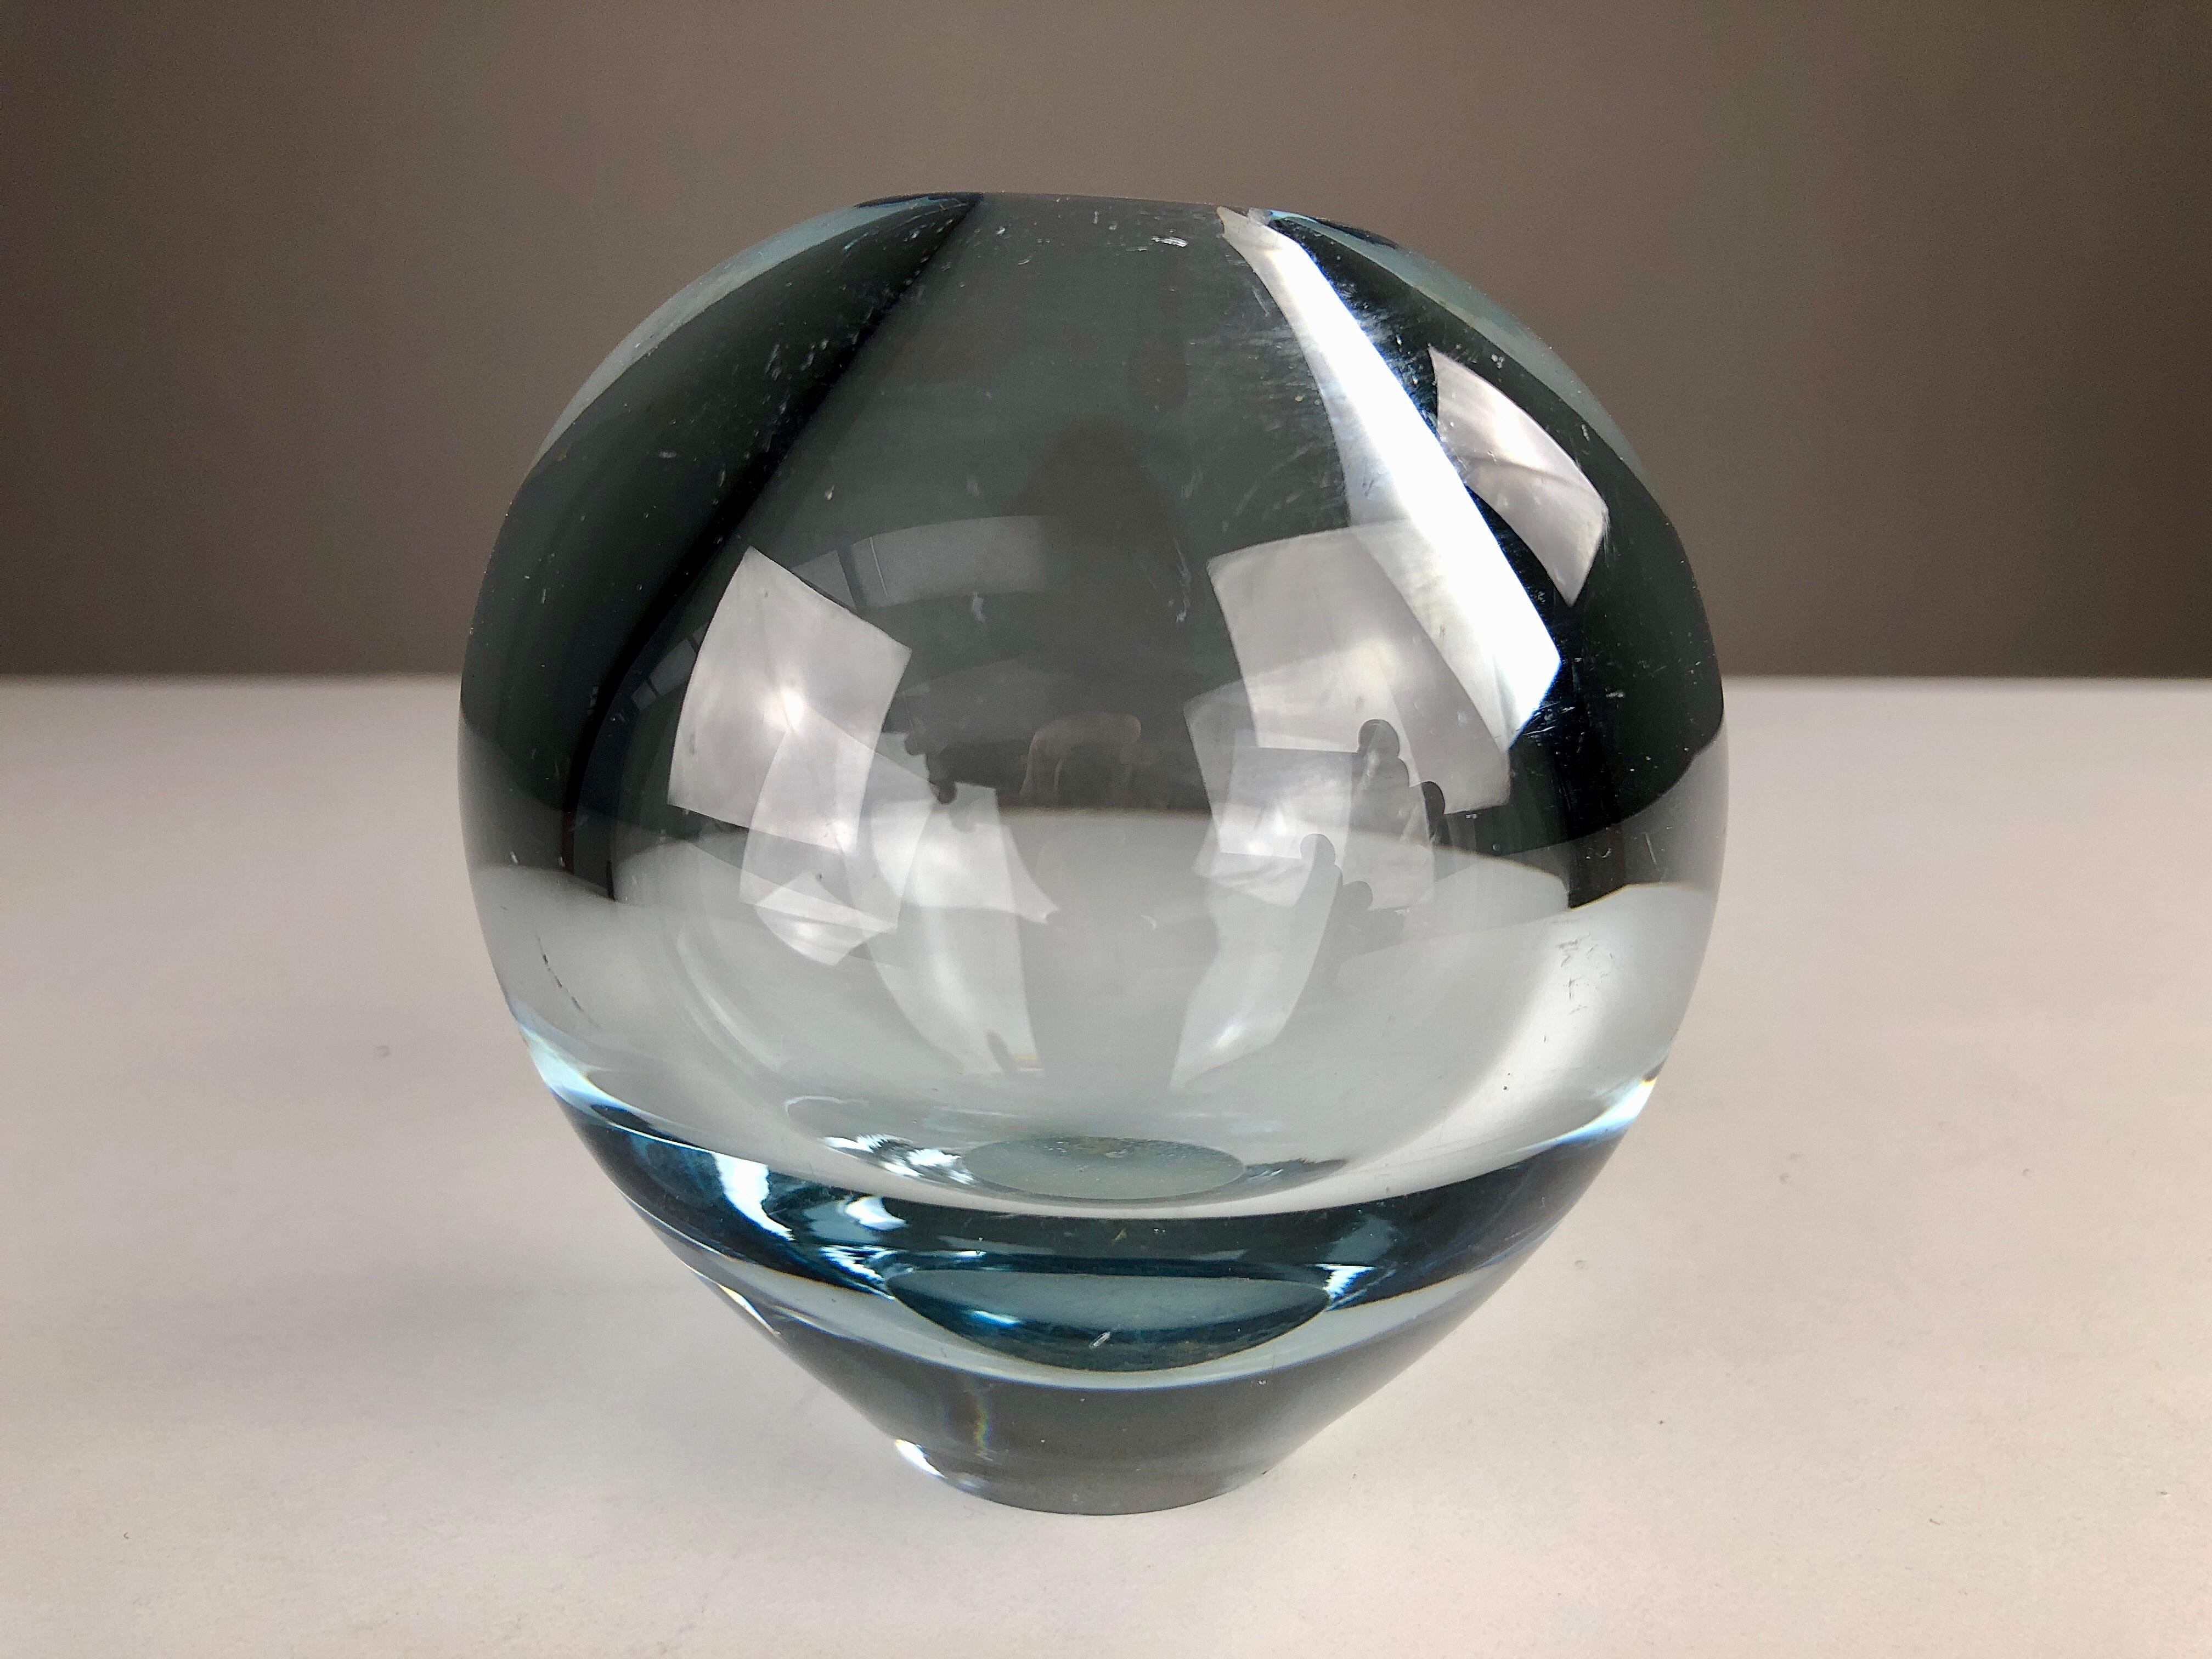 1960 Danish handblown glass drop vase by Per Lütken for Holmegaard with engraved signature and year of production.

Danish glassmaker Per Lütken (1916 - 1998) worked at Holmegaard from 1942 until his death in 1998. During this period he created some